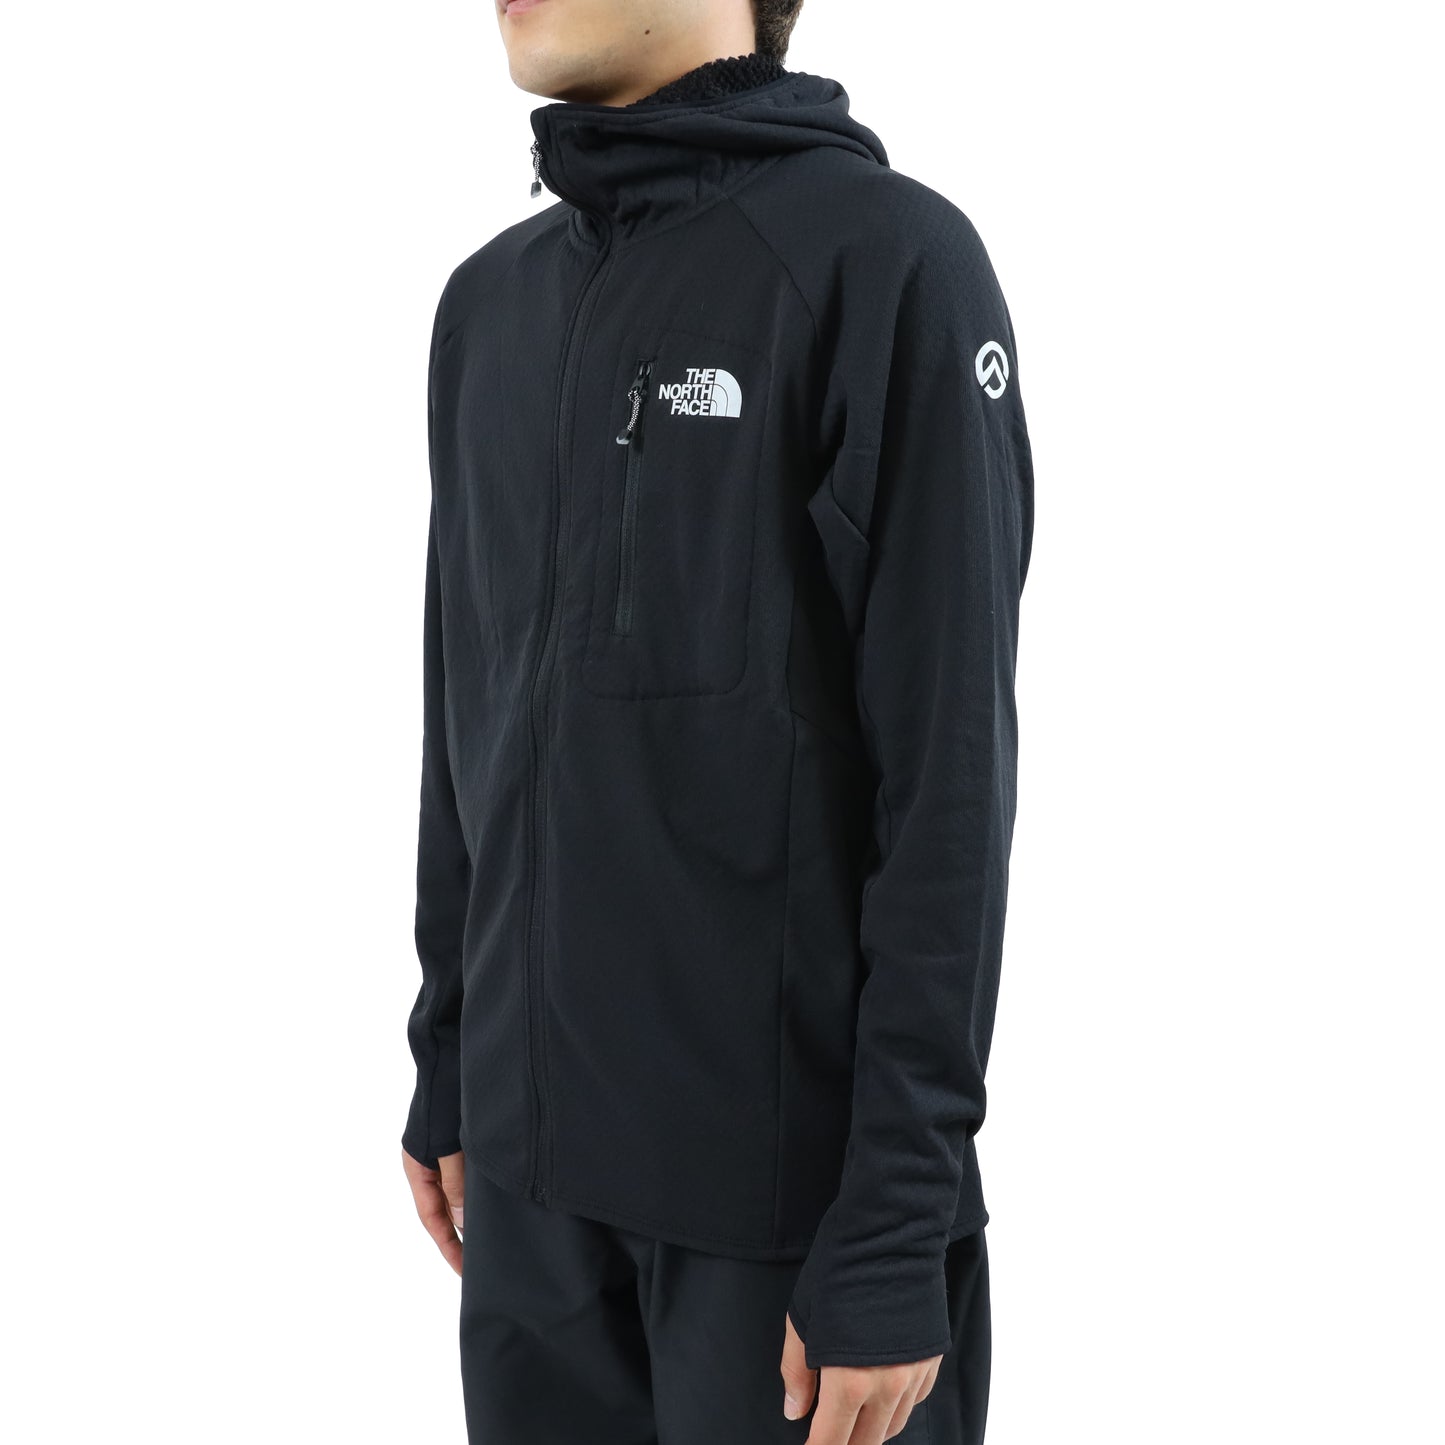 【THE NORTH FACE】Expedition Grid Fleece Full Zip Hoodie